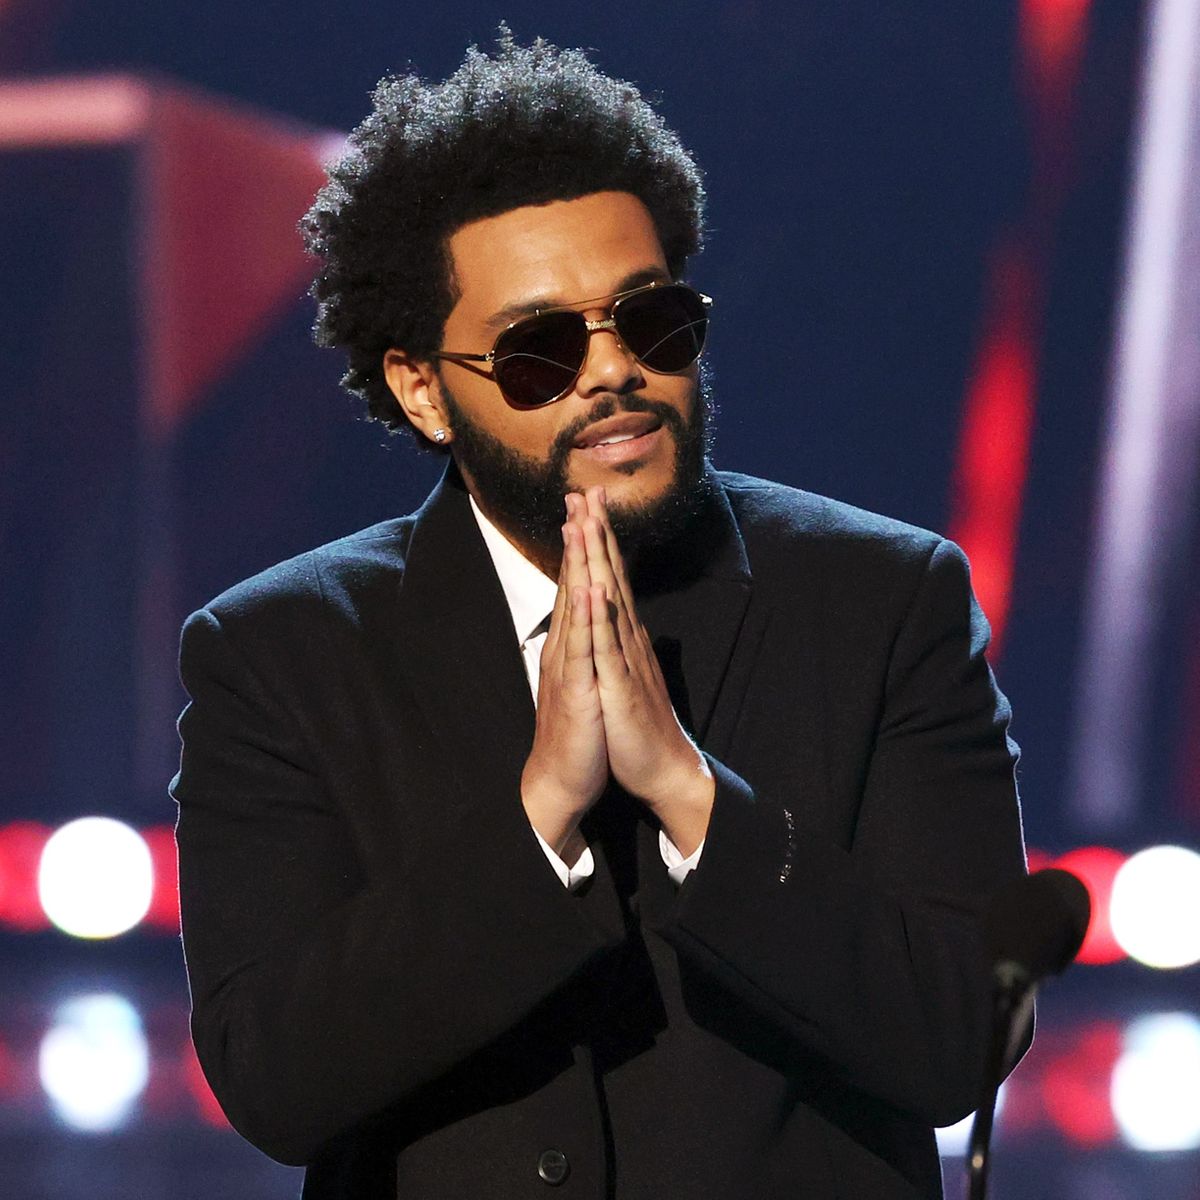 The Weeknd Blinding Lights Breaks Most Chart Weeks Record